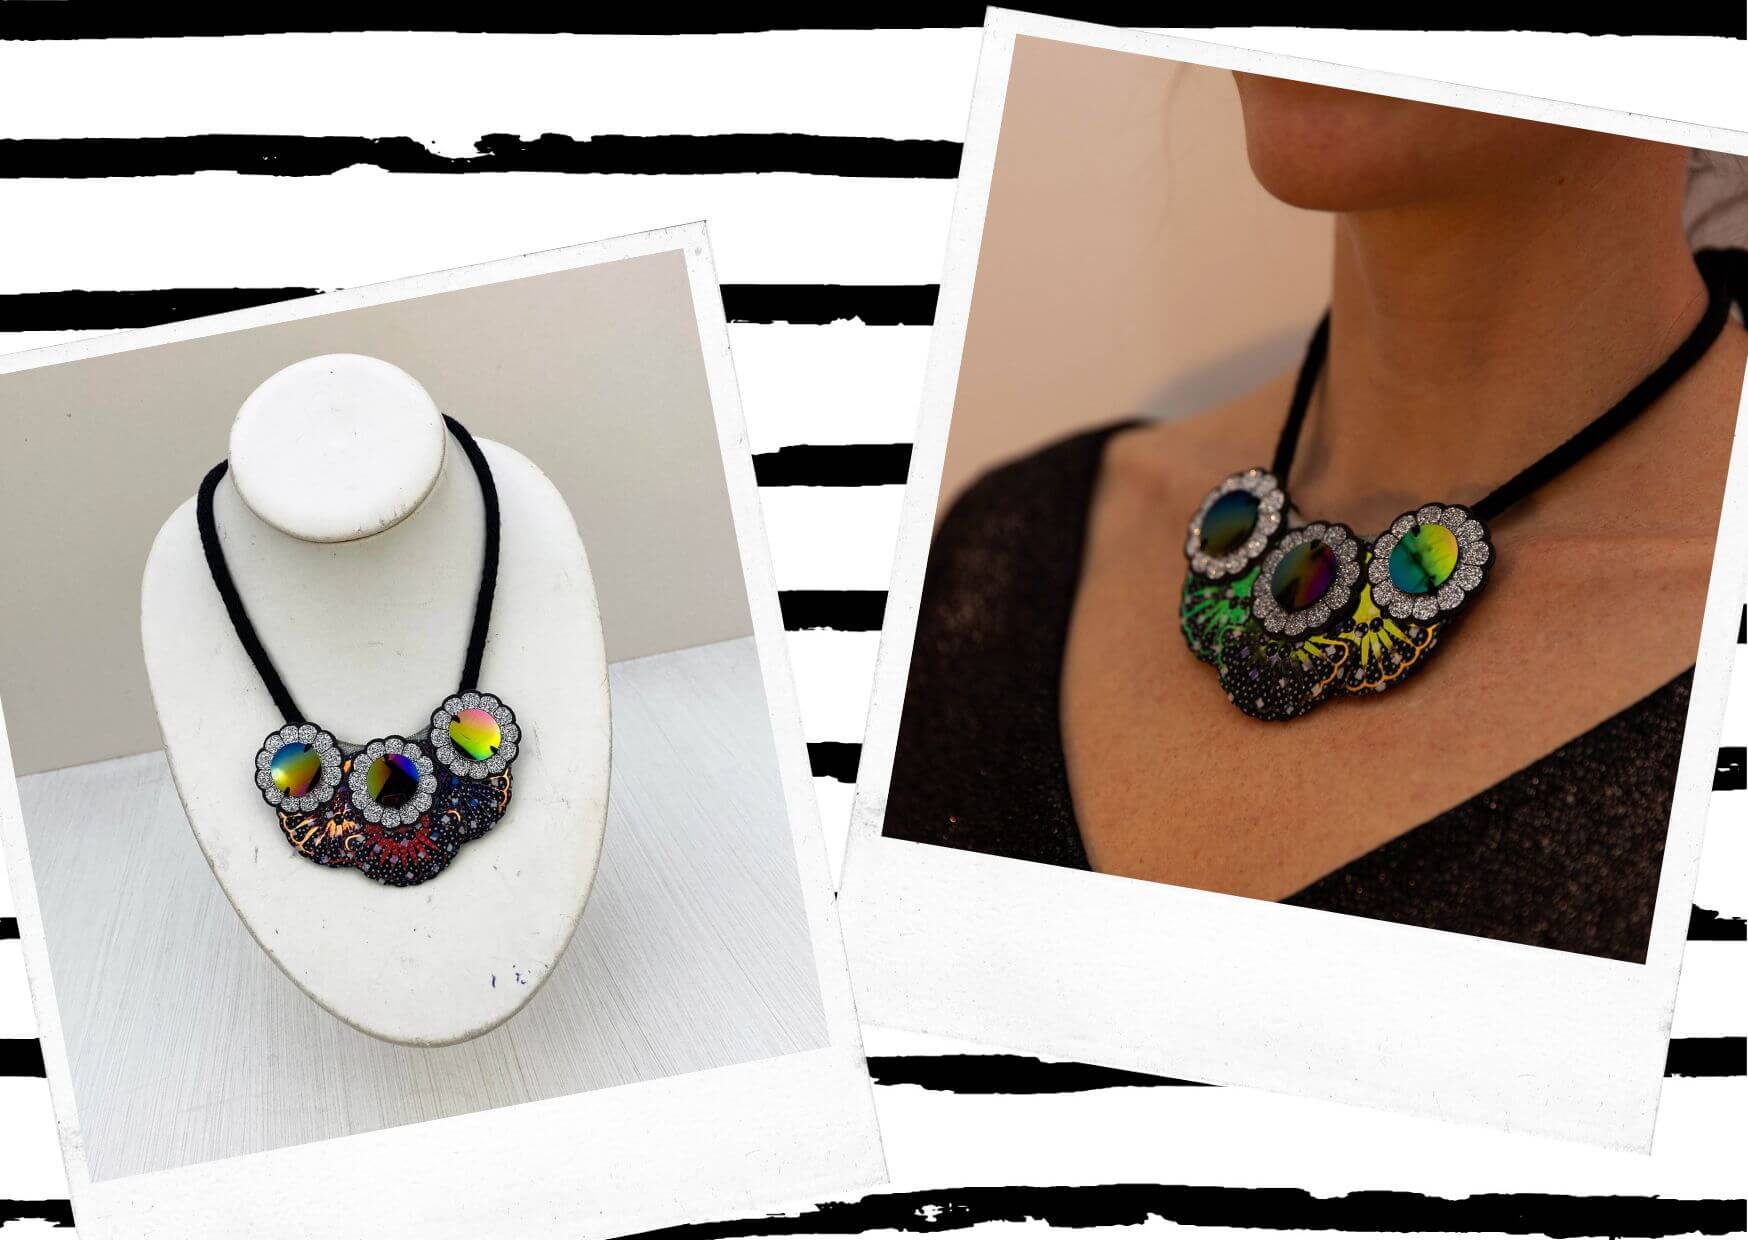 Two polaroids are scattered at jaunty angles on a white background with black hand drawn looking stripes. Both images are of a black, silver statement bib necklace adorned with petrol look discs. In one image the necklace is being worn by a woman wearing a low cut dark coloured top and in the other it is displayed on a white mannequin neck.